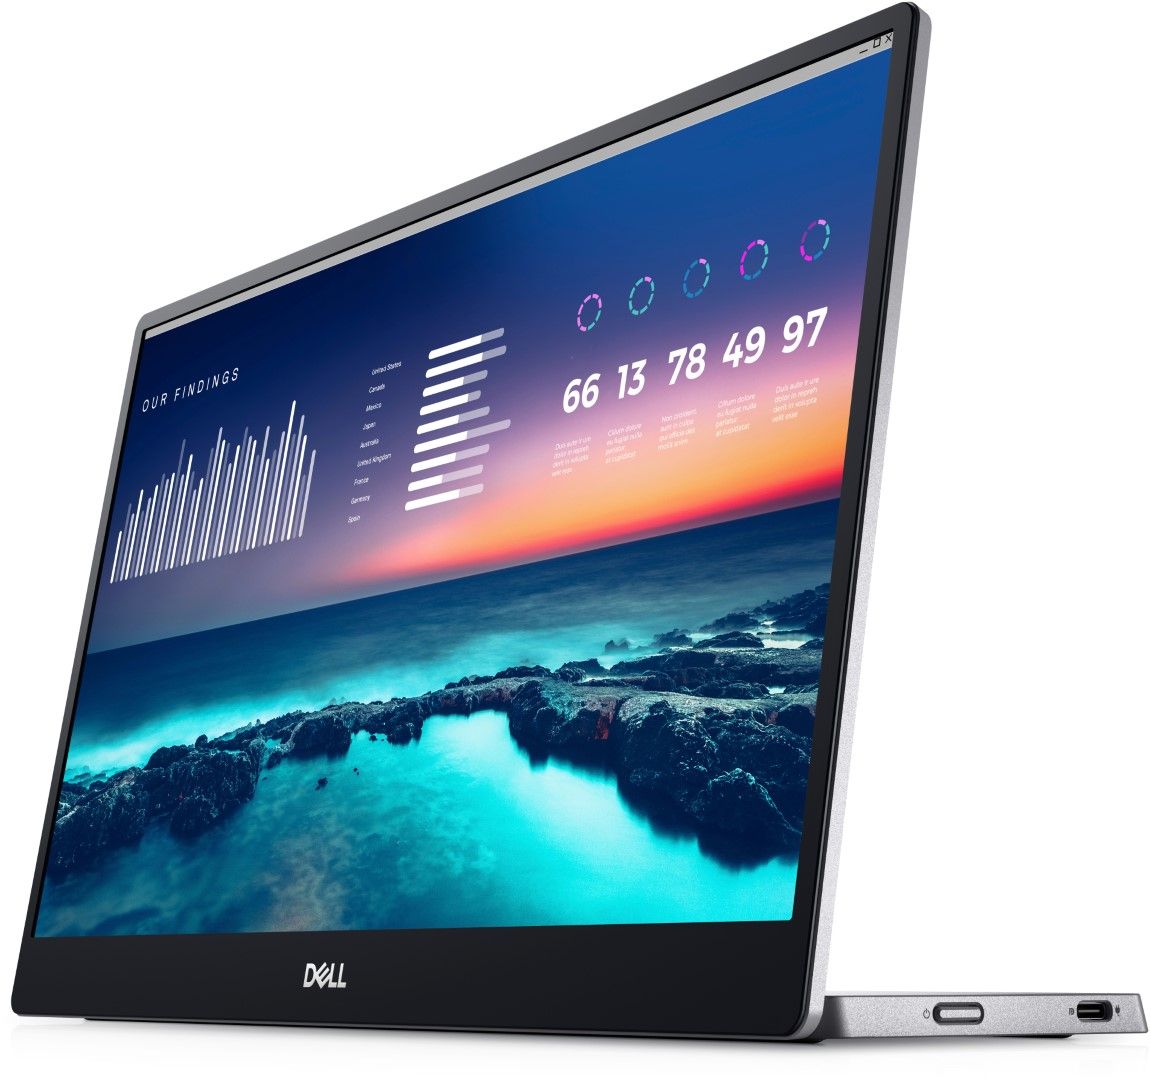 Is a dual-monitor setup too important for you? Now, you can take it anywhere with the Dell 14 Portable Monitor. This 14-inch Full HD panel is lightweight and easy to carry, and it lets you get two screens anywhere you go using just a USB Type-C port. It is a bit expensive, though.